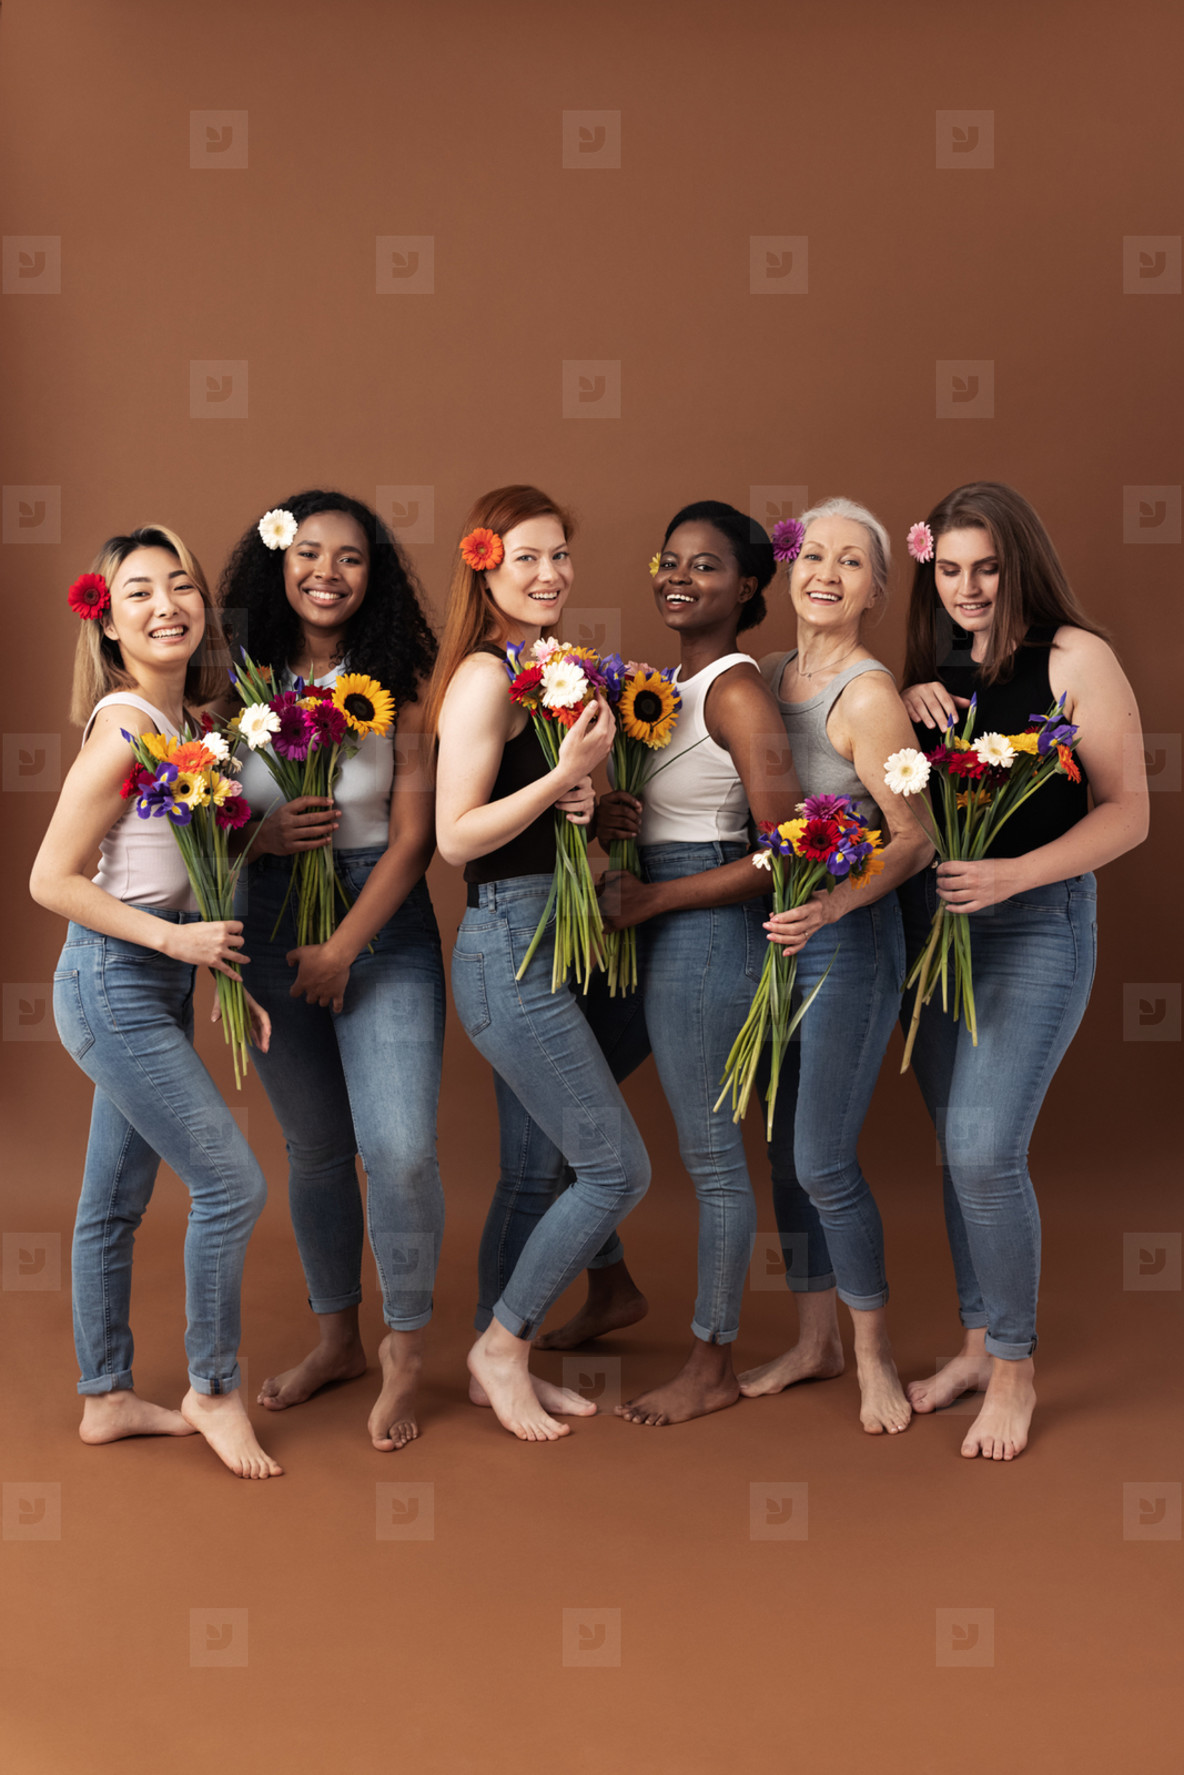 Full body shot of six women of different ages standing together with bouquets of flowers  Smiling women in casuals with flowers in hair